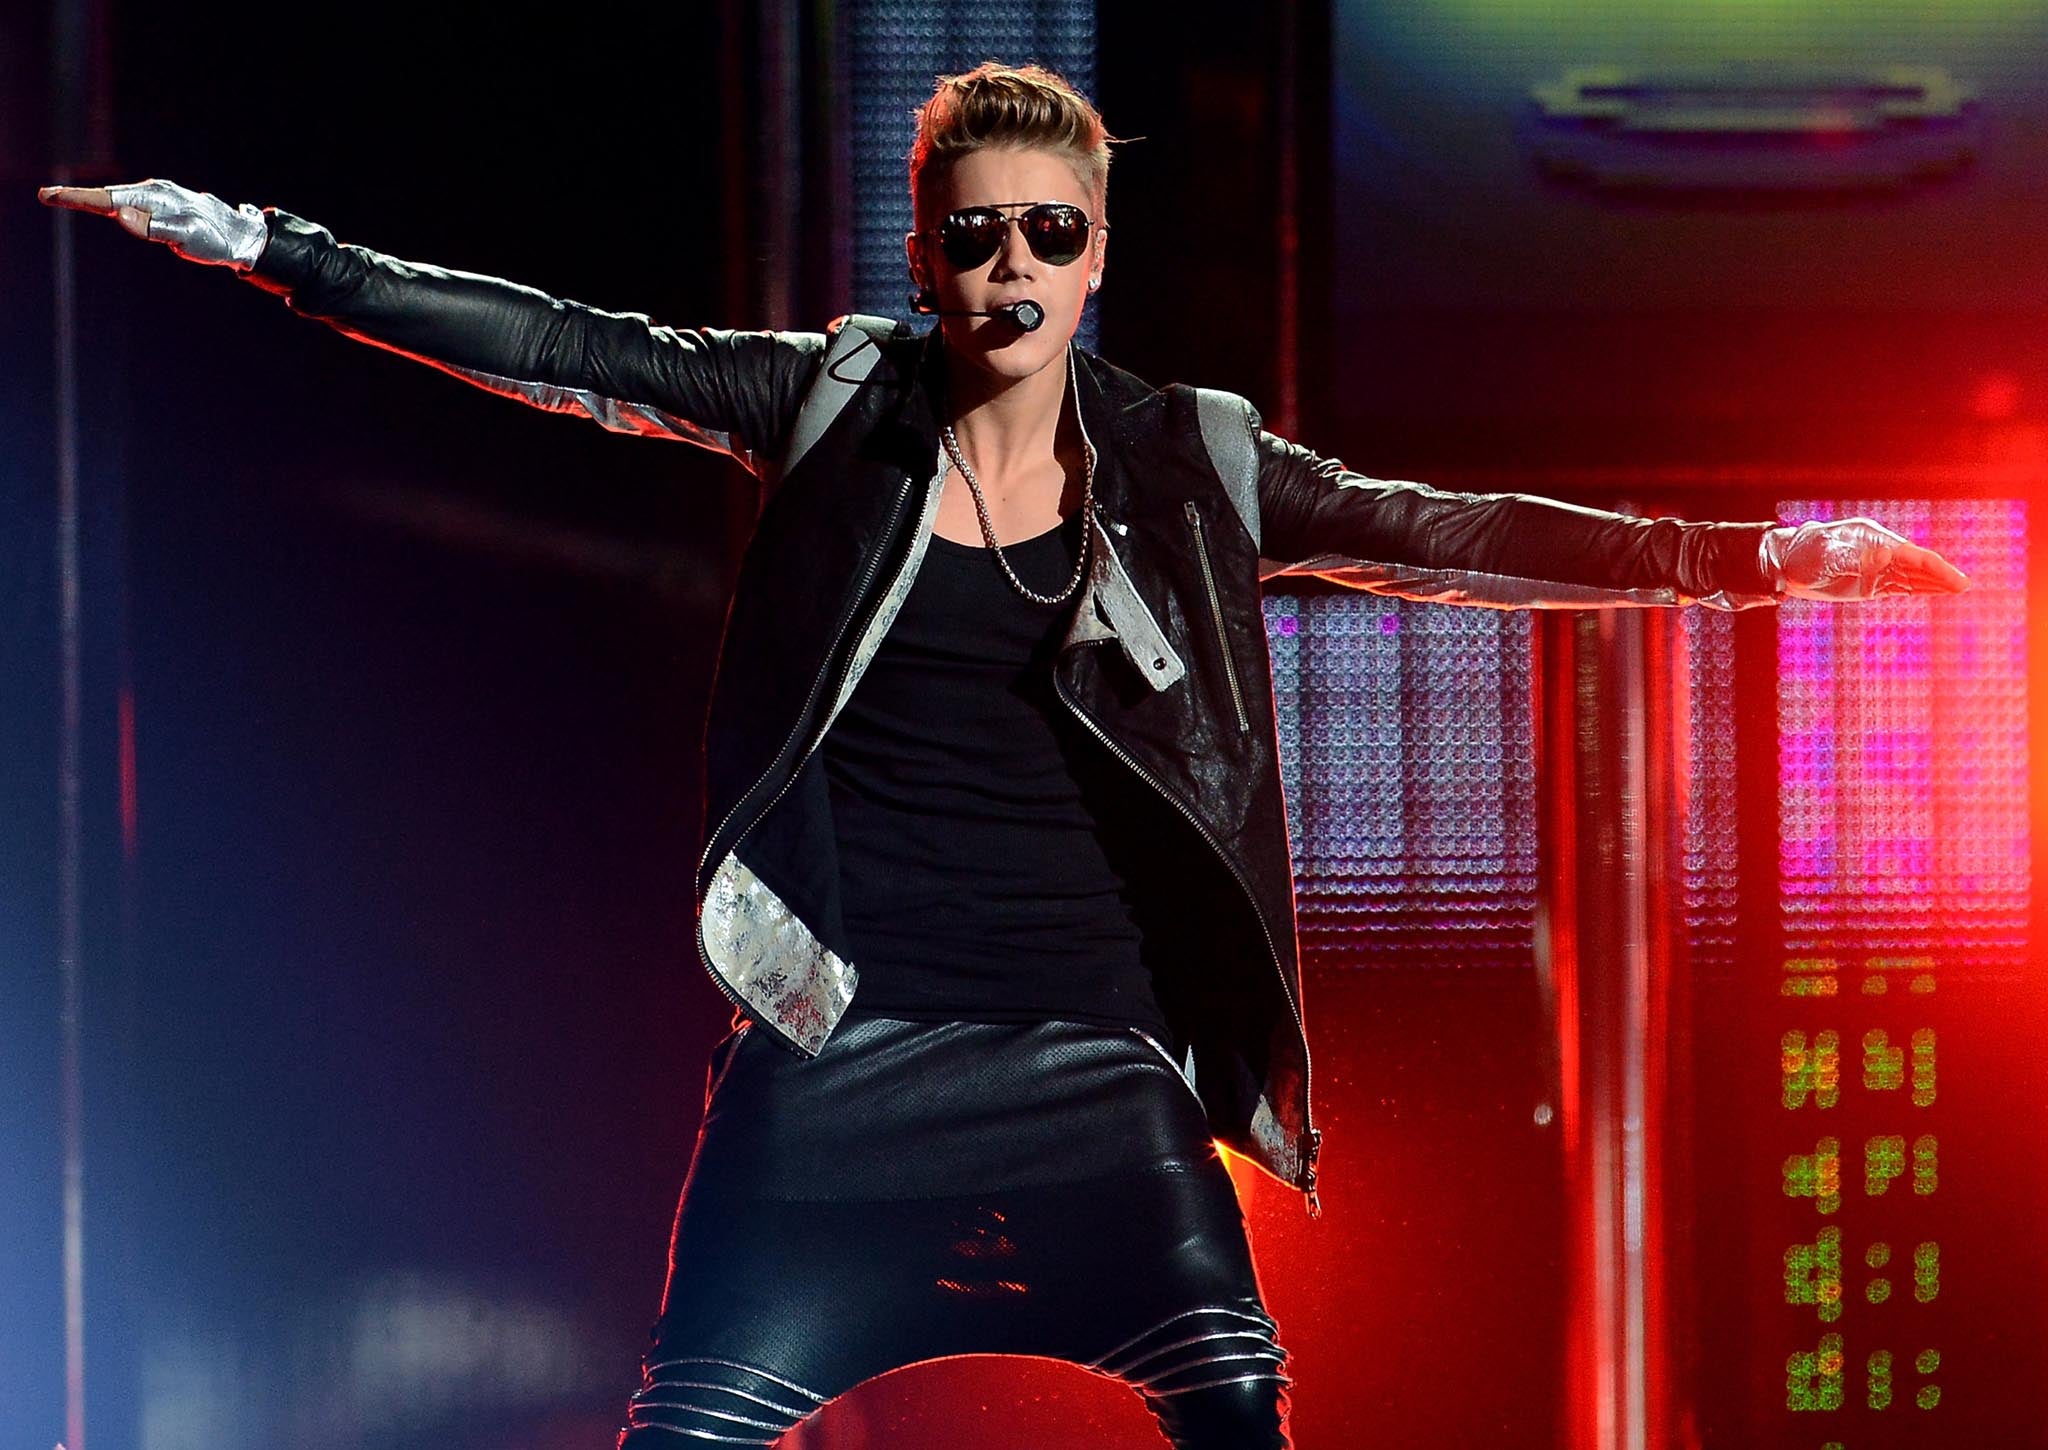 Even bizarre low-crotch trousers are not enough to secure Bieber a UK Top 40 result